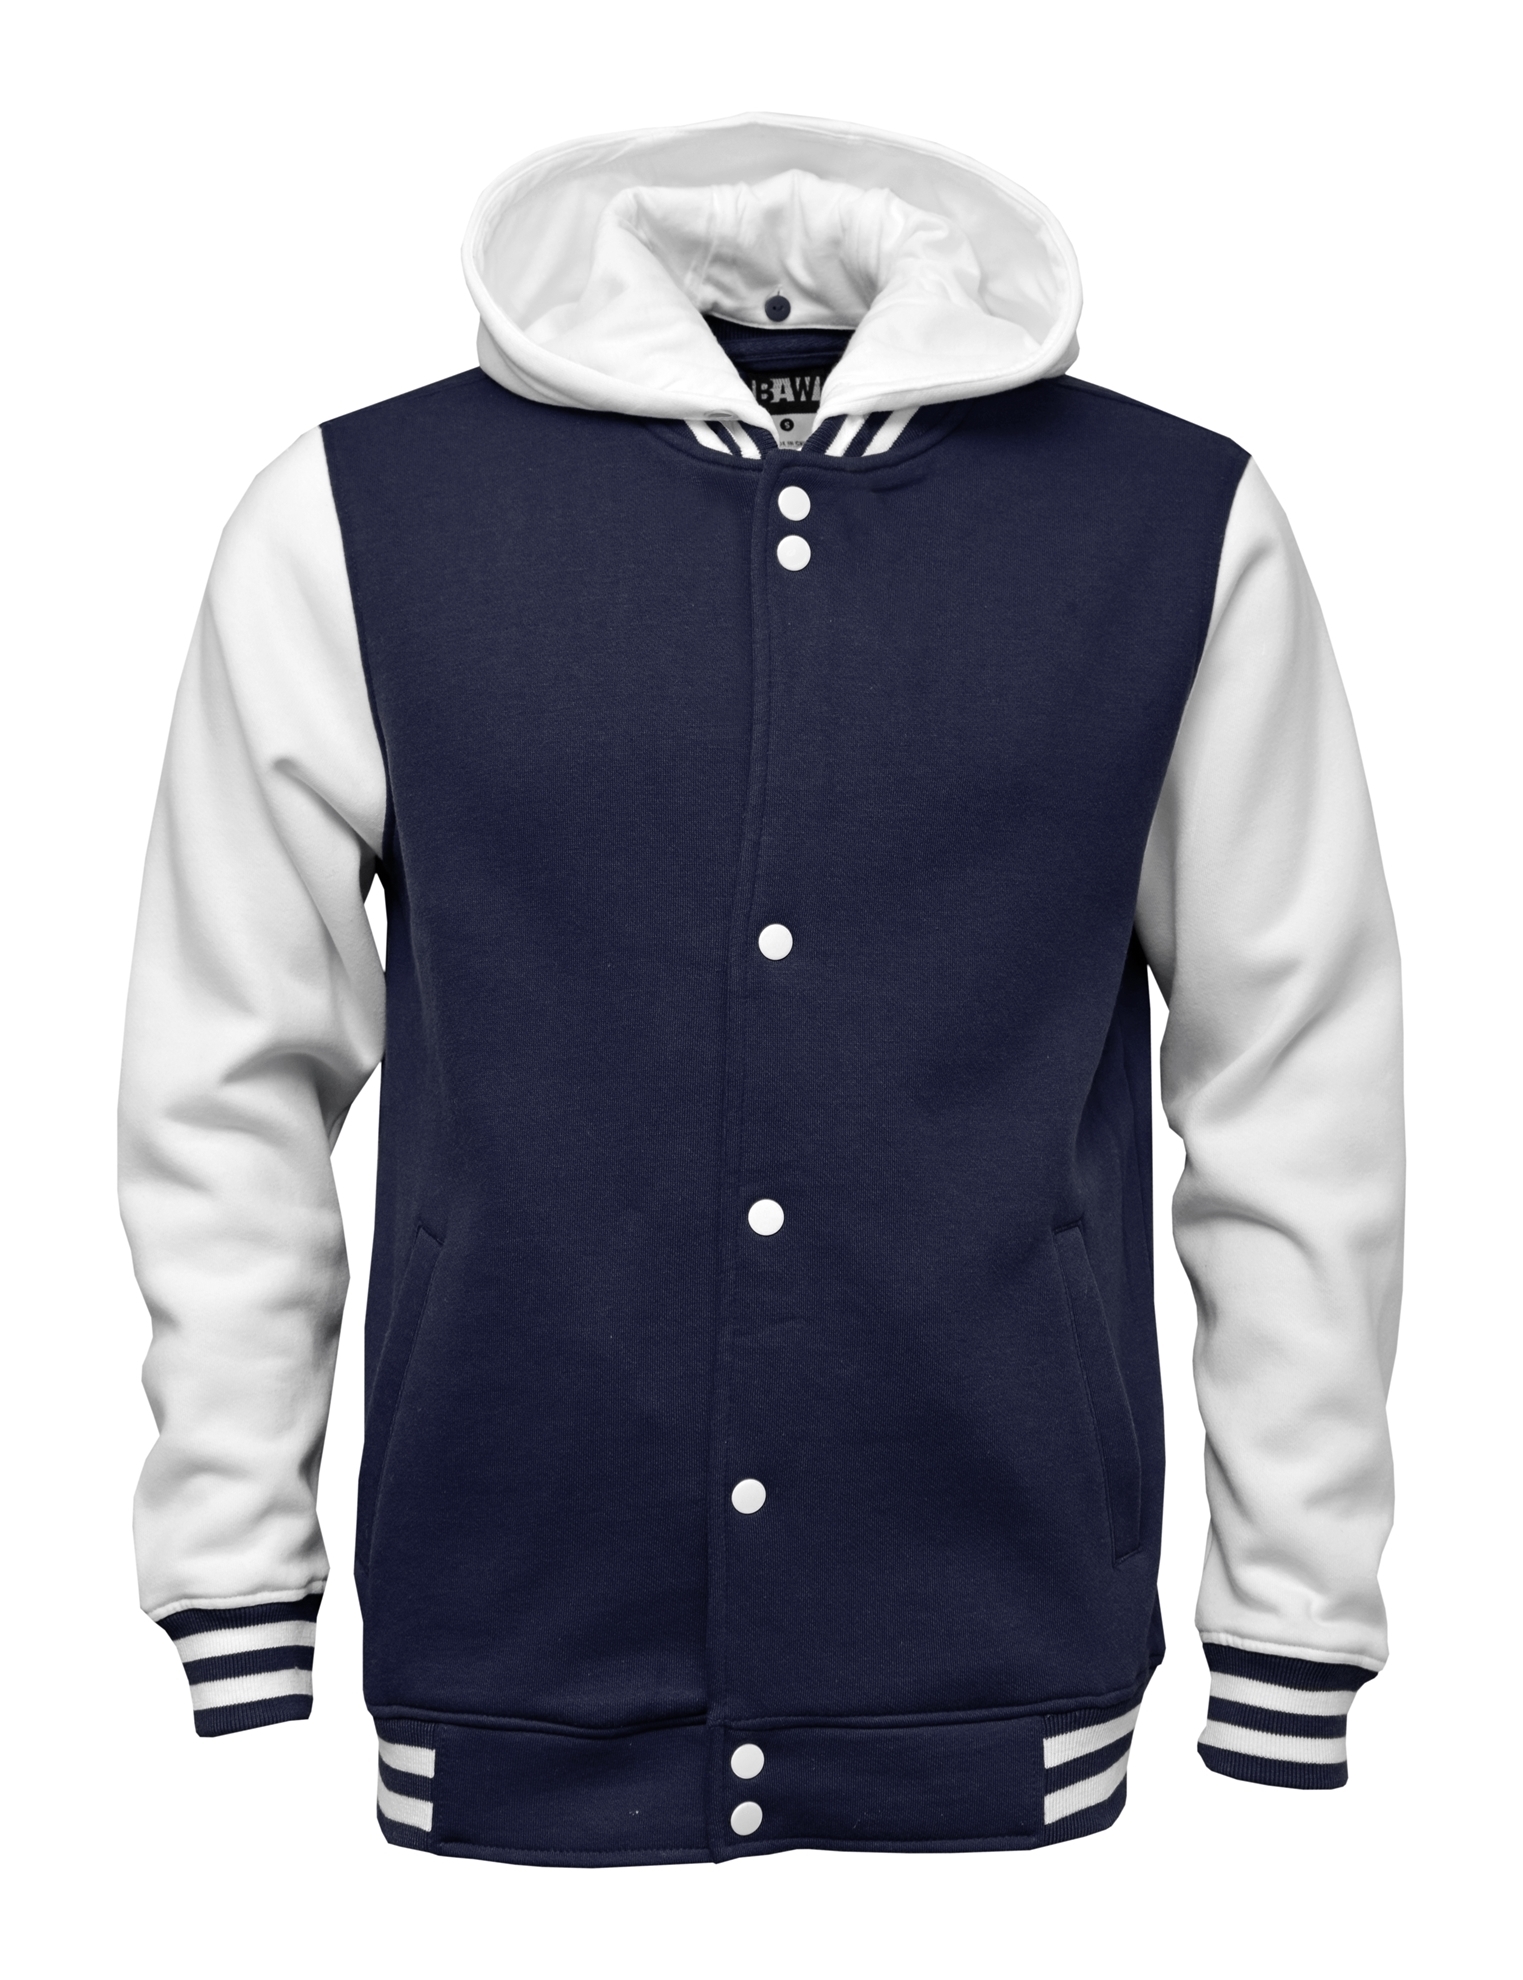 click to view NAVY/WHITE